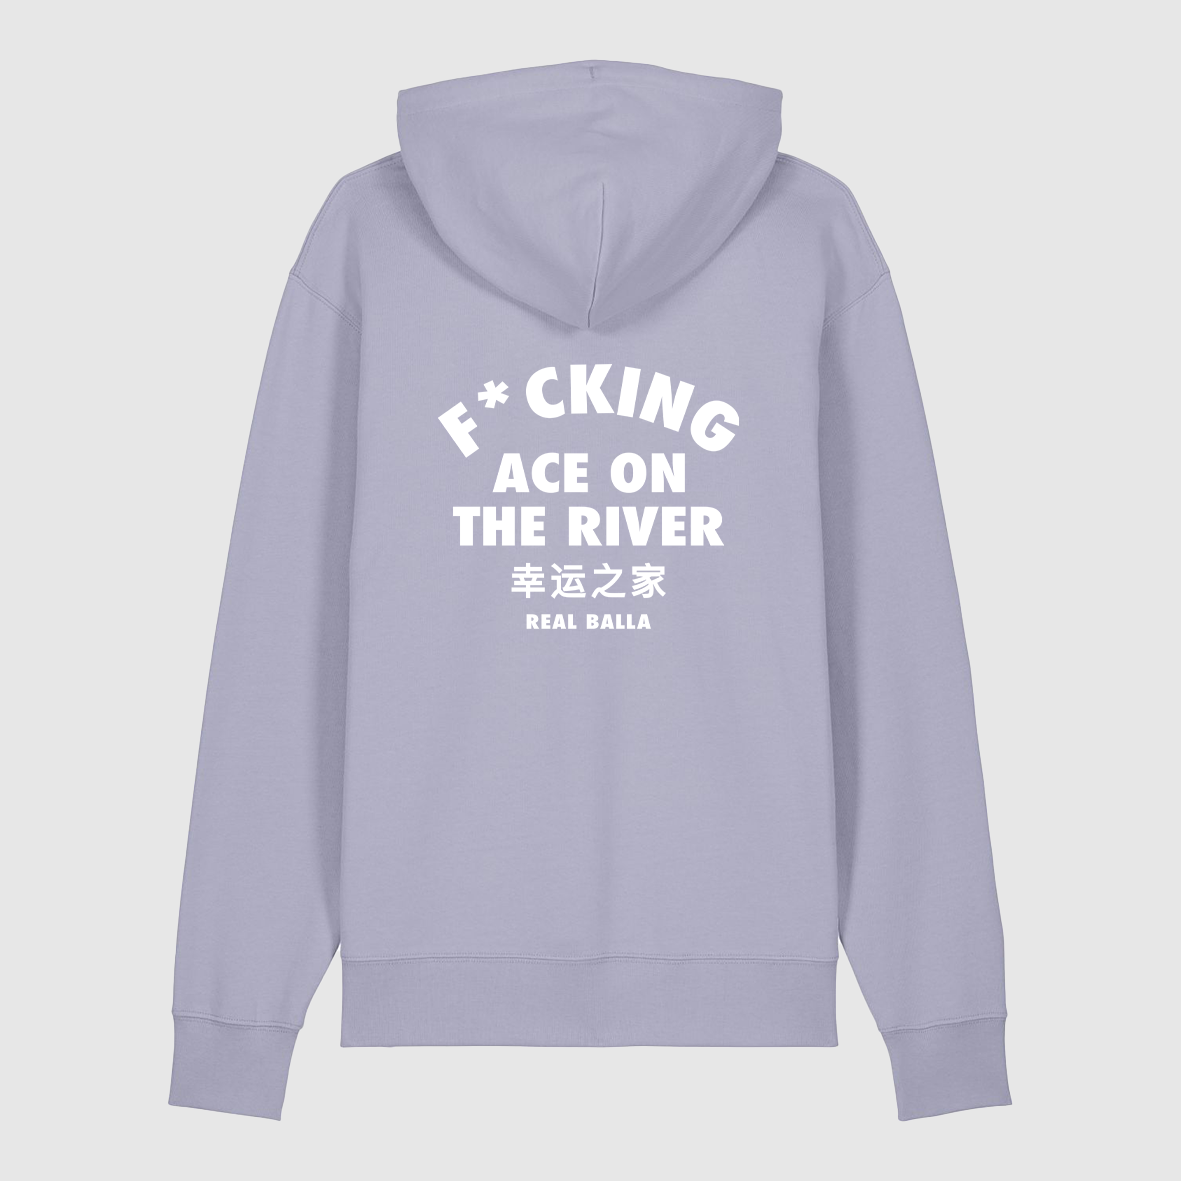 Hoodie F*cking ace on the river